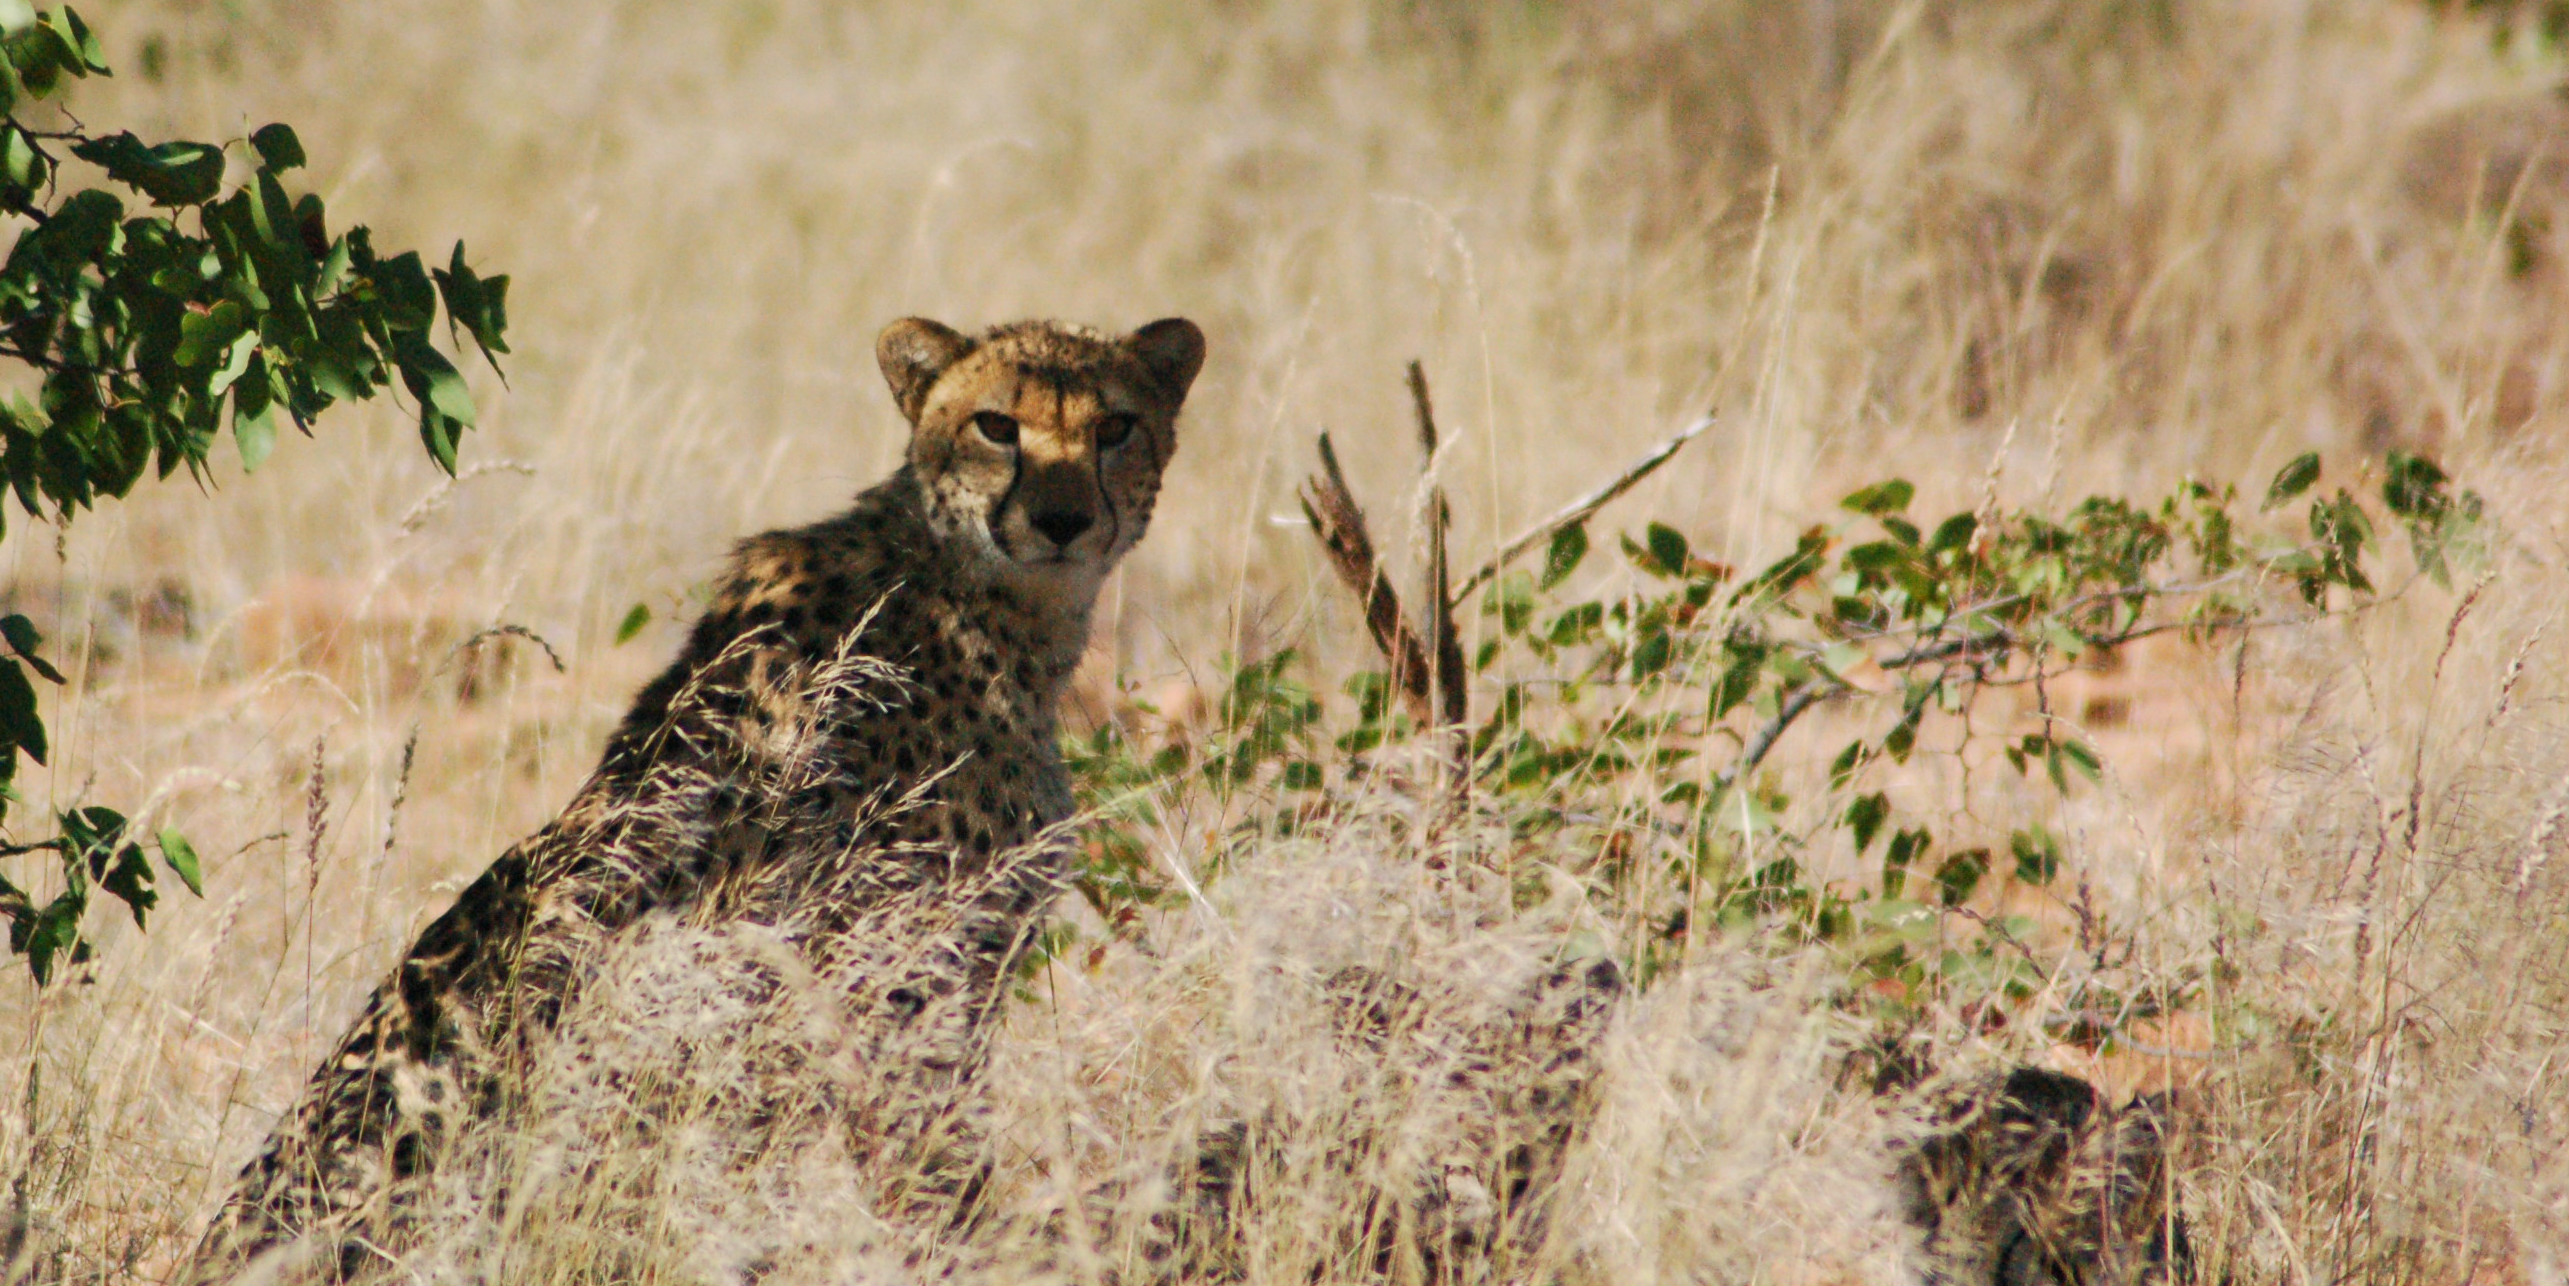 A cheetah spends some time in the cool shade. Cheetah conservation volunteers will record the cheetah's behaviour, as part of their conservation volunteering program.